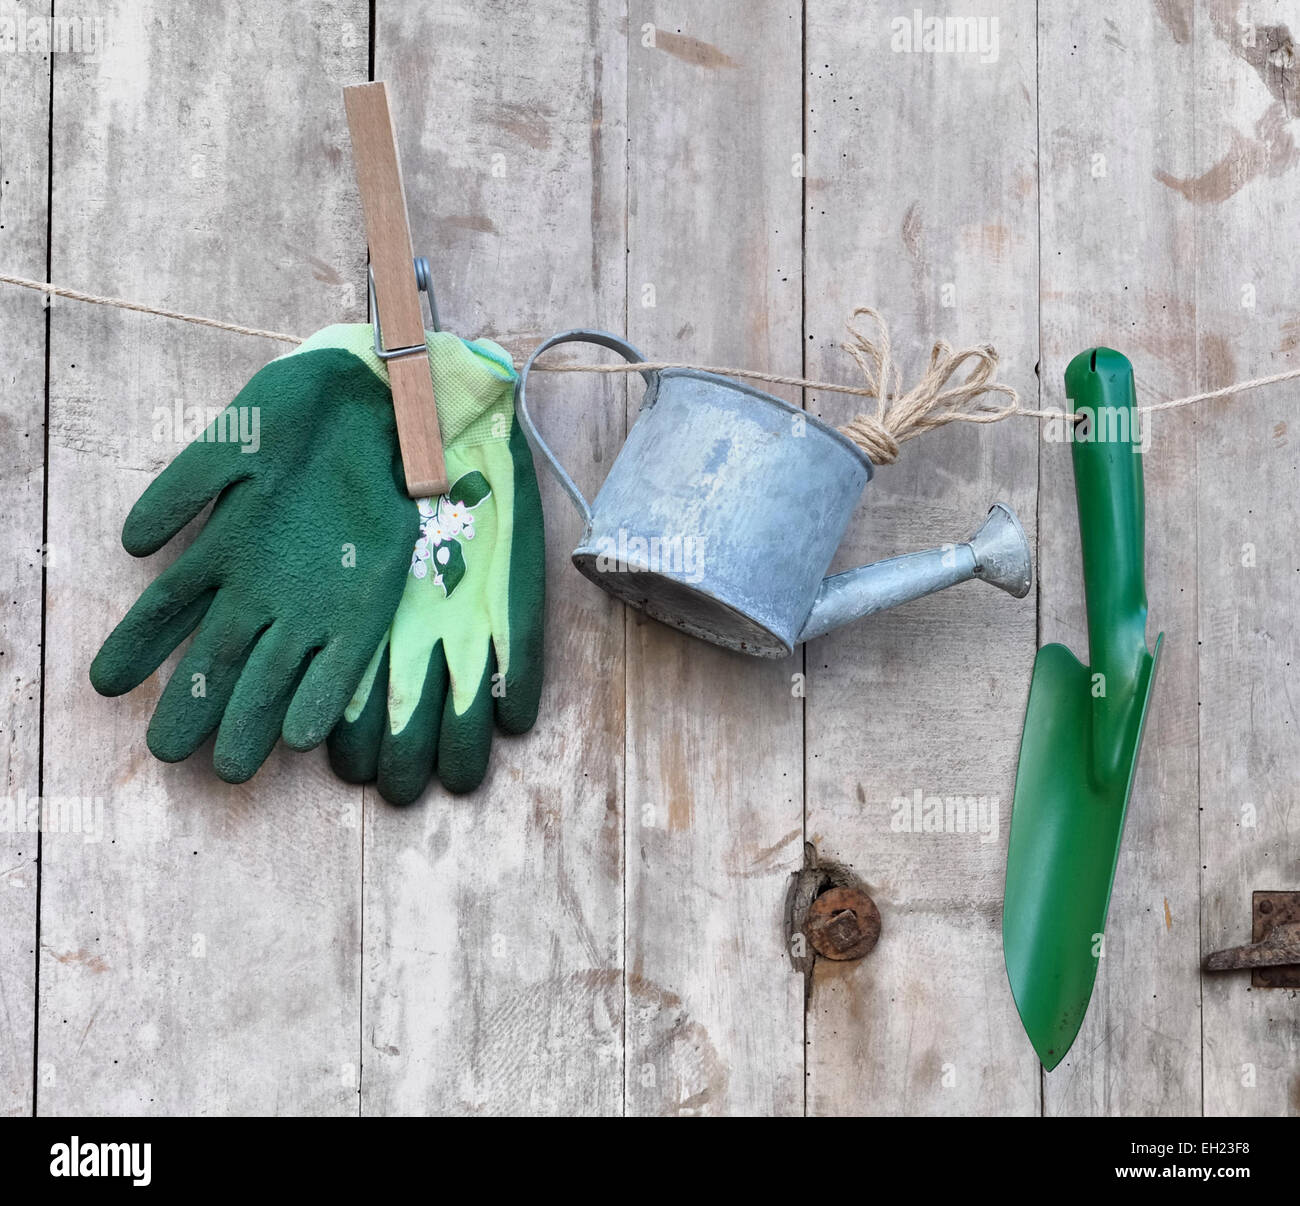 gloves,watering can and tool hanging on a string on wooden background Stock Photo